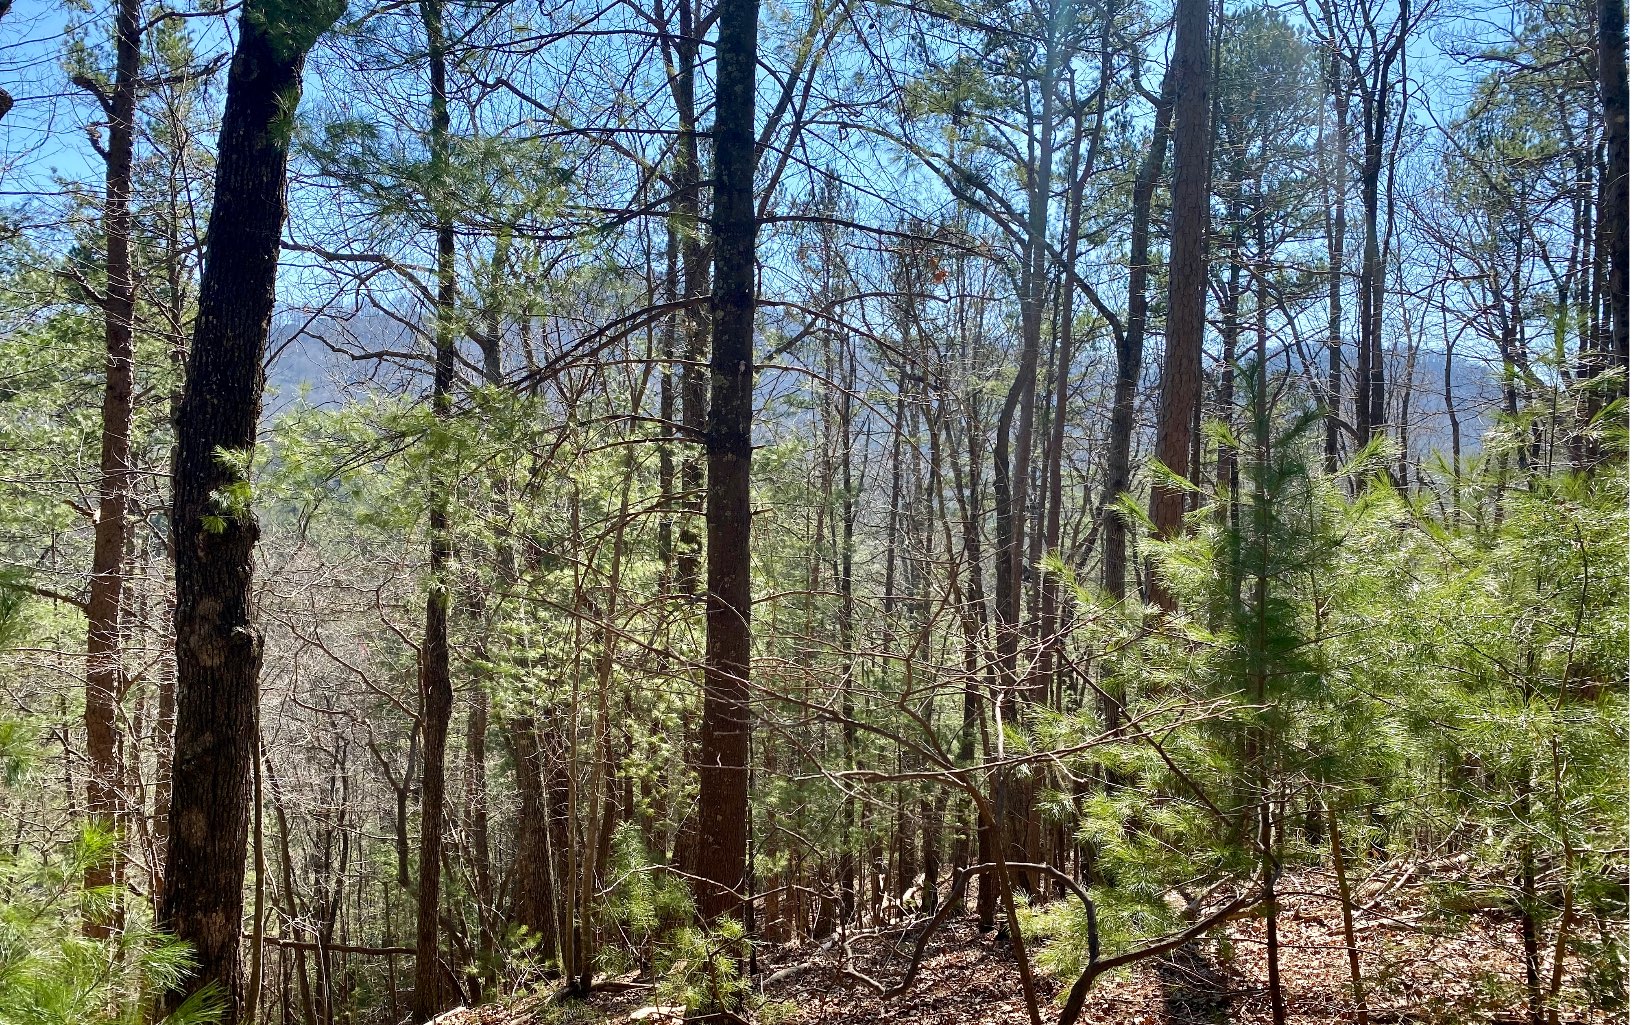 REDUCED!!!!! Priced below assessment value for quick sale - motivated seller!! TWO conjoining mountain view cul-de-sac lots that back up to green space near the gate of Walnut Mountain Community, in the heart of Ellijay Georgia - what more could you ask for?!?! With a little trimming, these two lots totaling 1.68 acres will offer long range mountain views, while being only 5 miles to downtown. Great property for a basement build, and they're at the end of a quiet street with minimal neighboring properties. Vast variety of mixed hardwoods and rolling terrain - you'll find a few different build sites to choose from on this property. Walnut Mountain offers many amenities including pool, tennis, lakes and picnic areas, walking trails and more - this the perfect spot to build your mountain dream home or vacation rental!